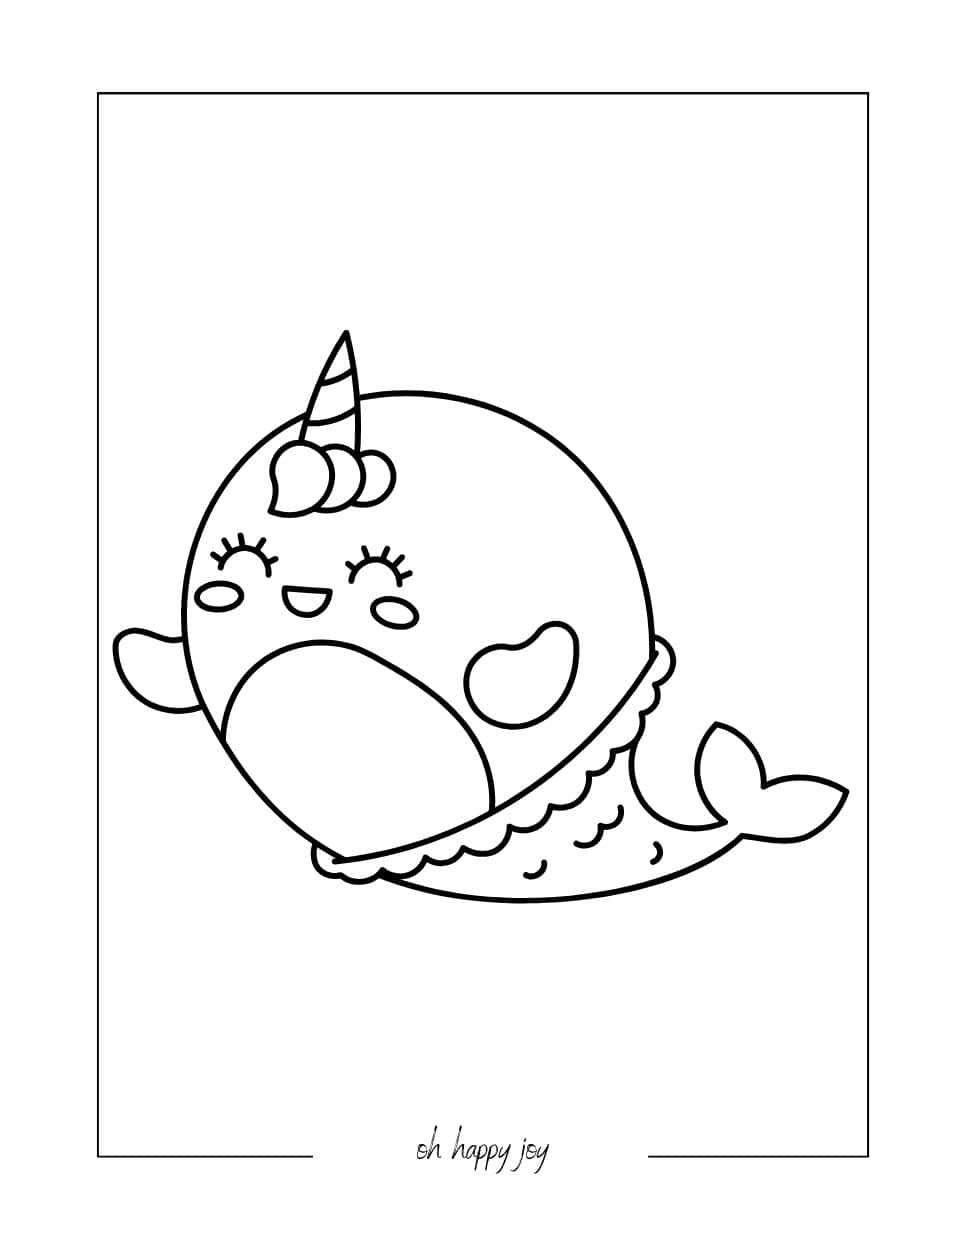 Merwhale Unicorn Coloring Page